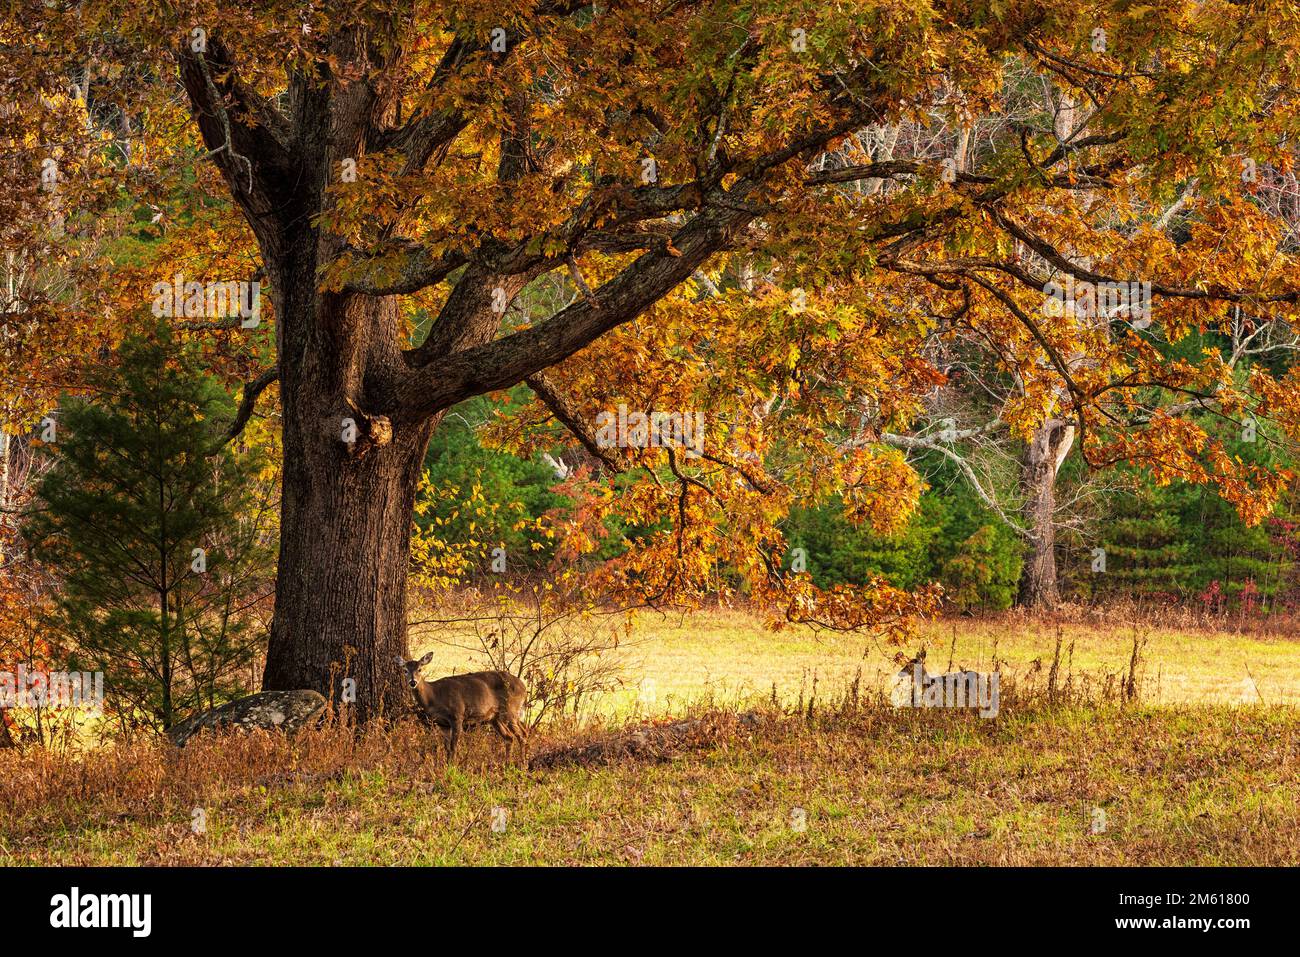 Deer rest under a large oak during autumn in the Cades Cove section of Great Smoky Mountains National Park in Tennessee Stock Photo